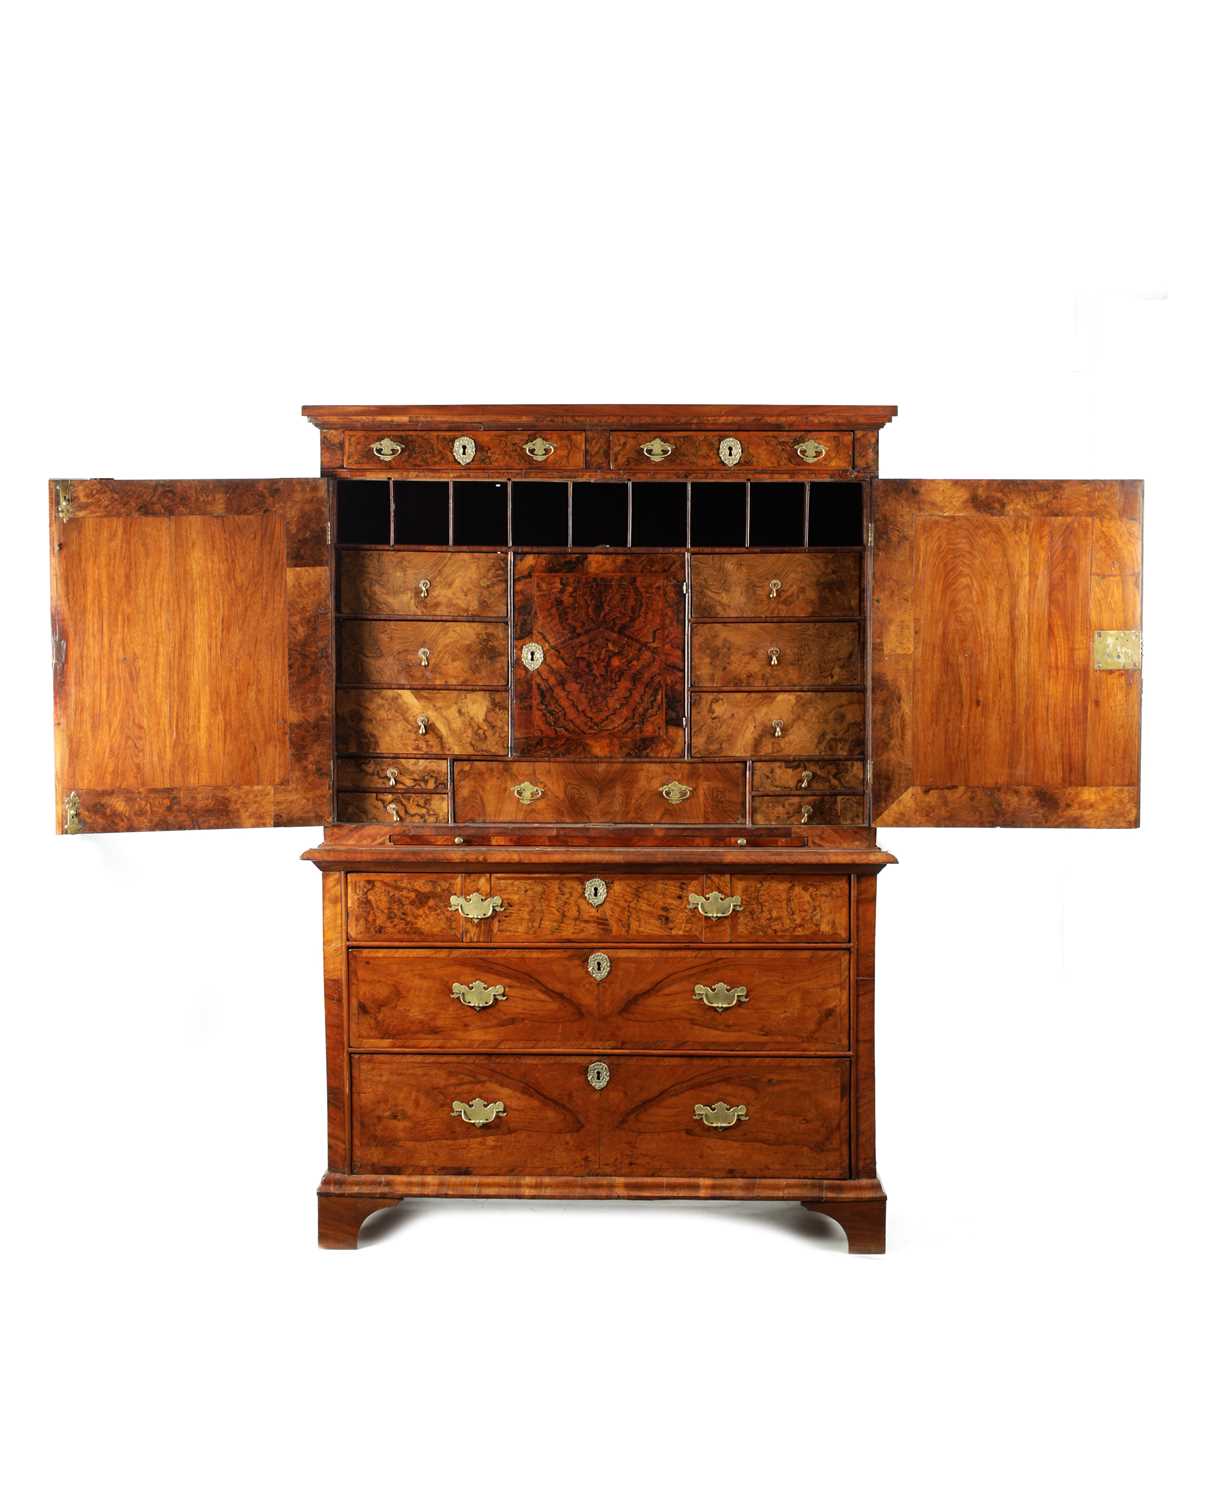 A WILLIAM AND MARY CROSS-BANDED AND GEOMETRICALLY INLAID FIGURED WALNUT CABINET ON CHEST - Image 3 of 7